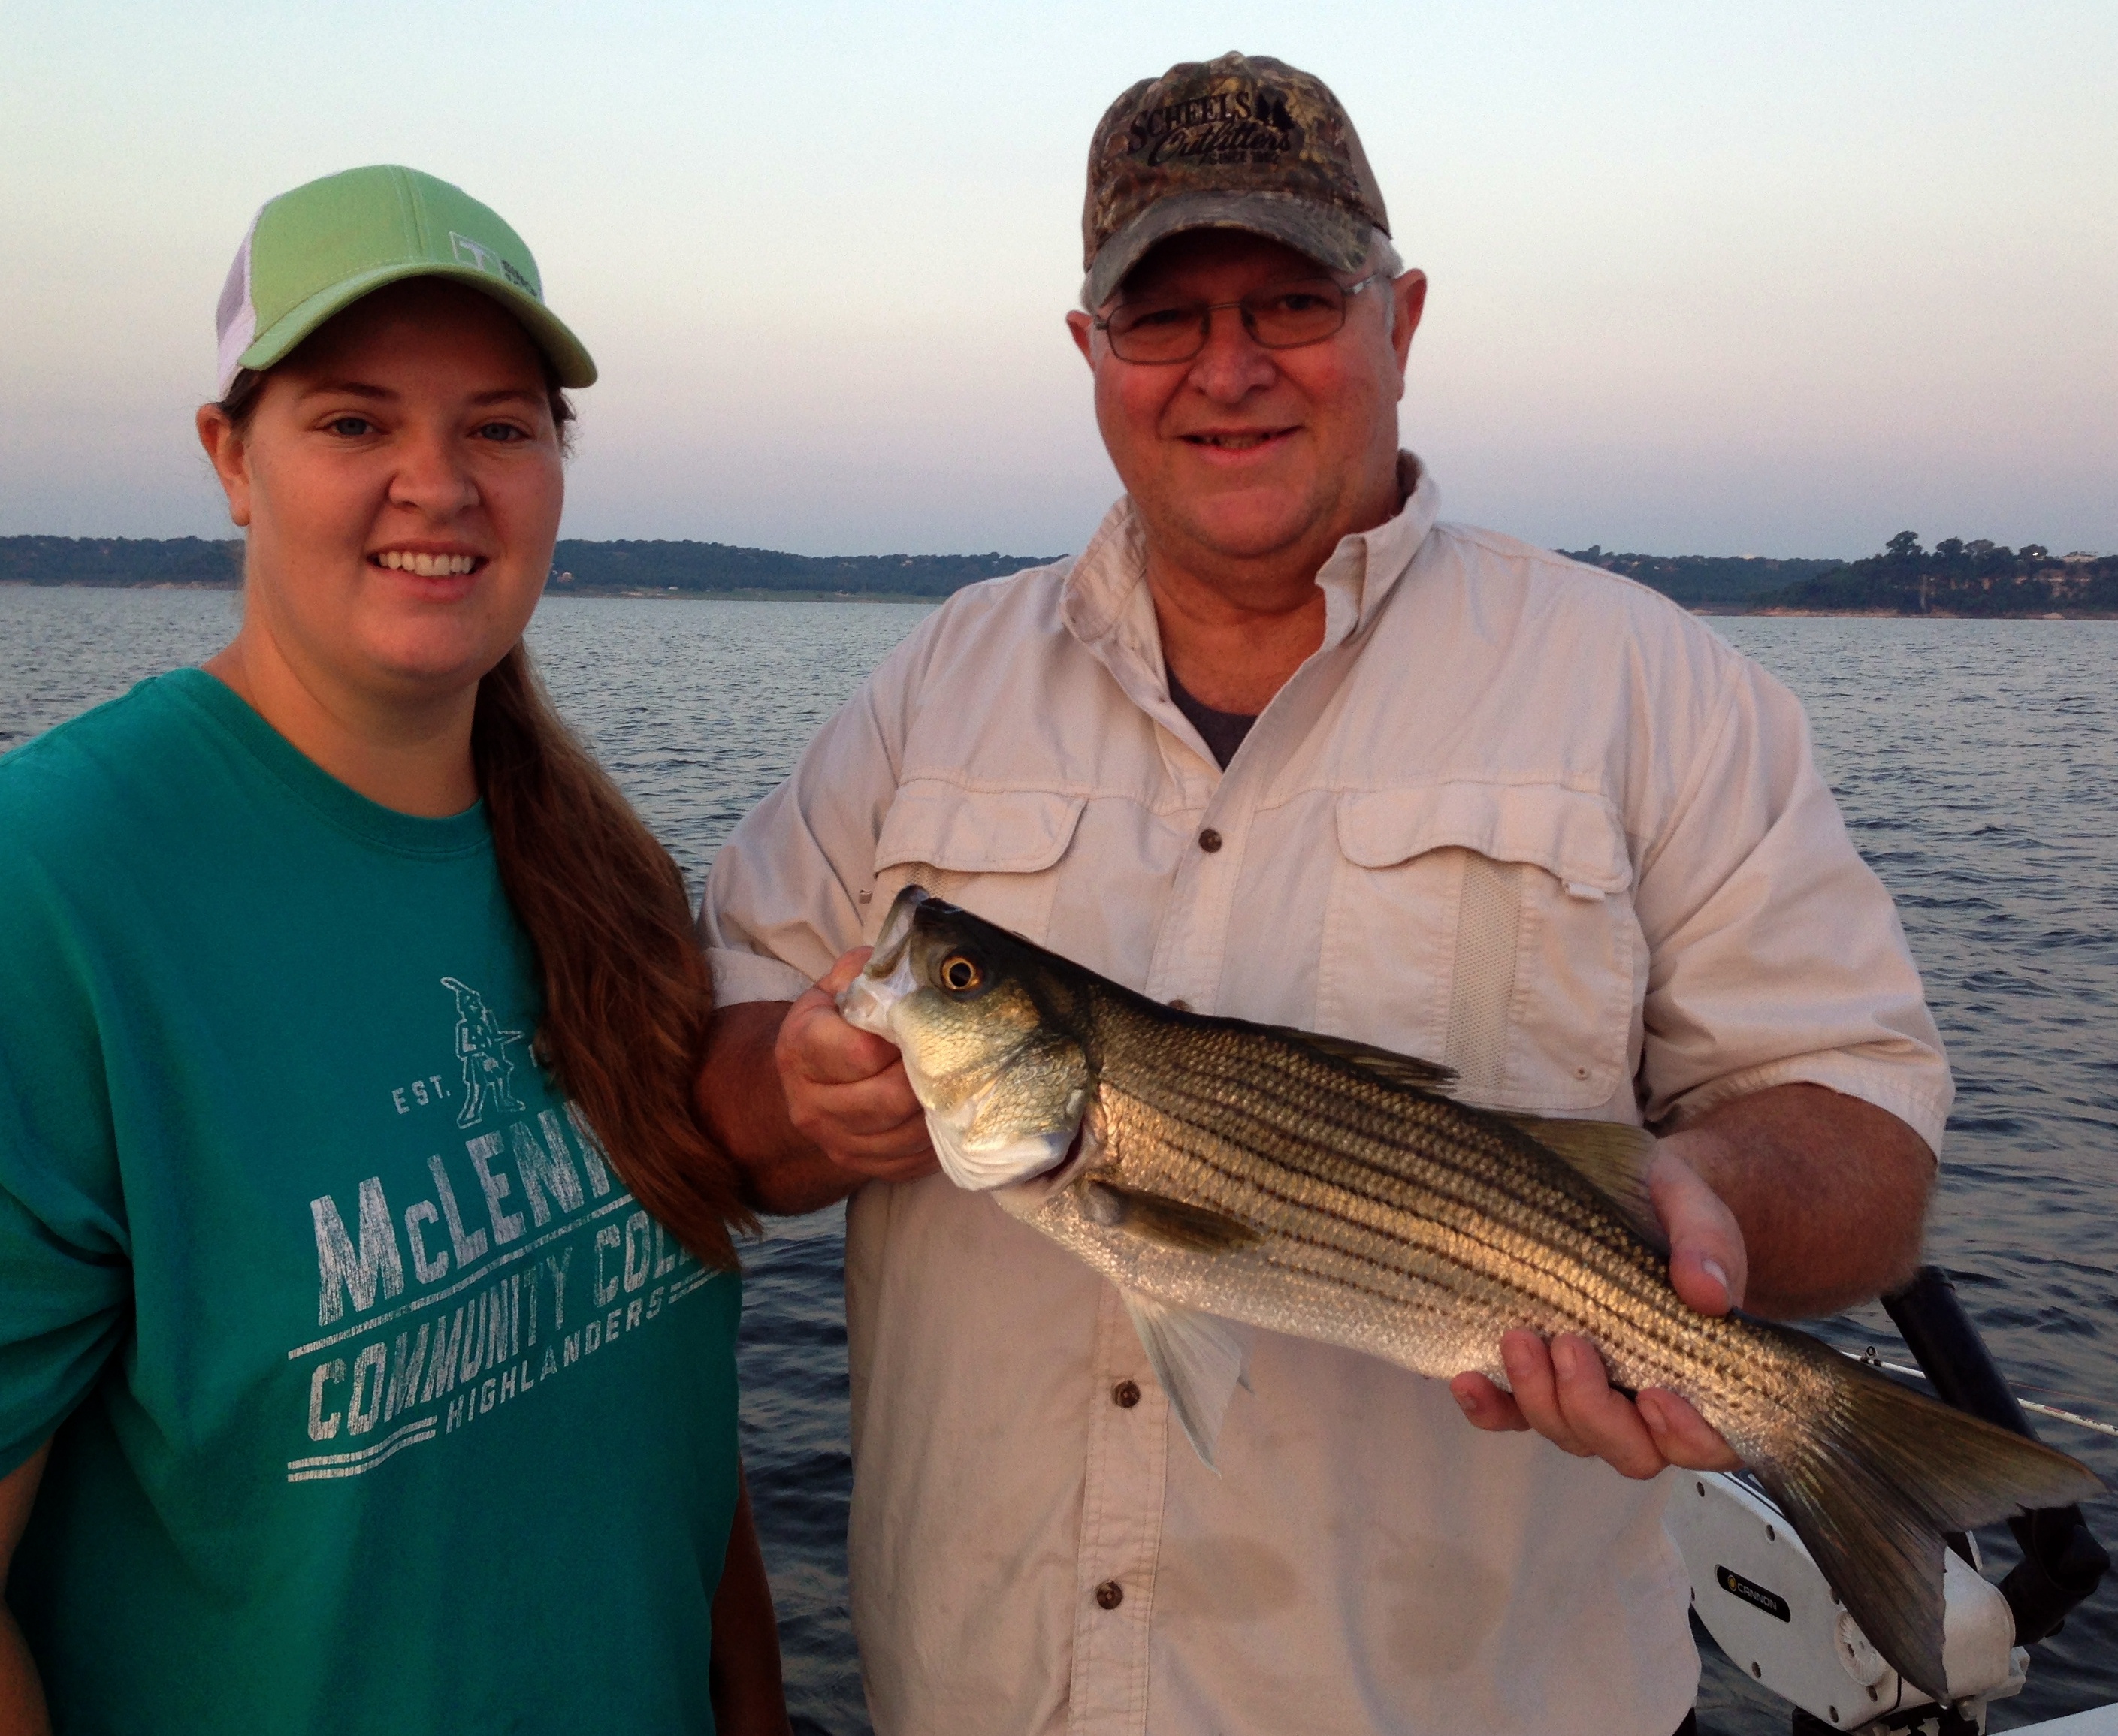 Fishing report from Wayne and Nick - Beausoleil